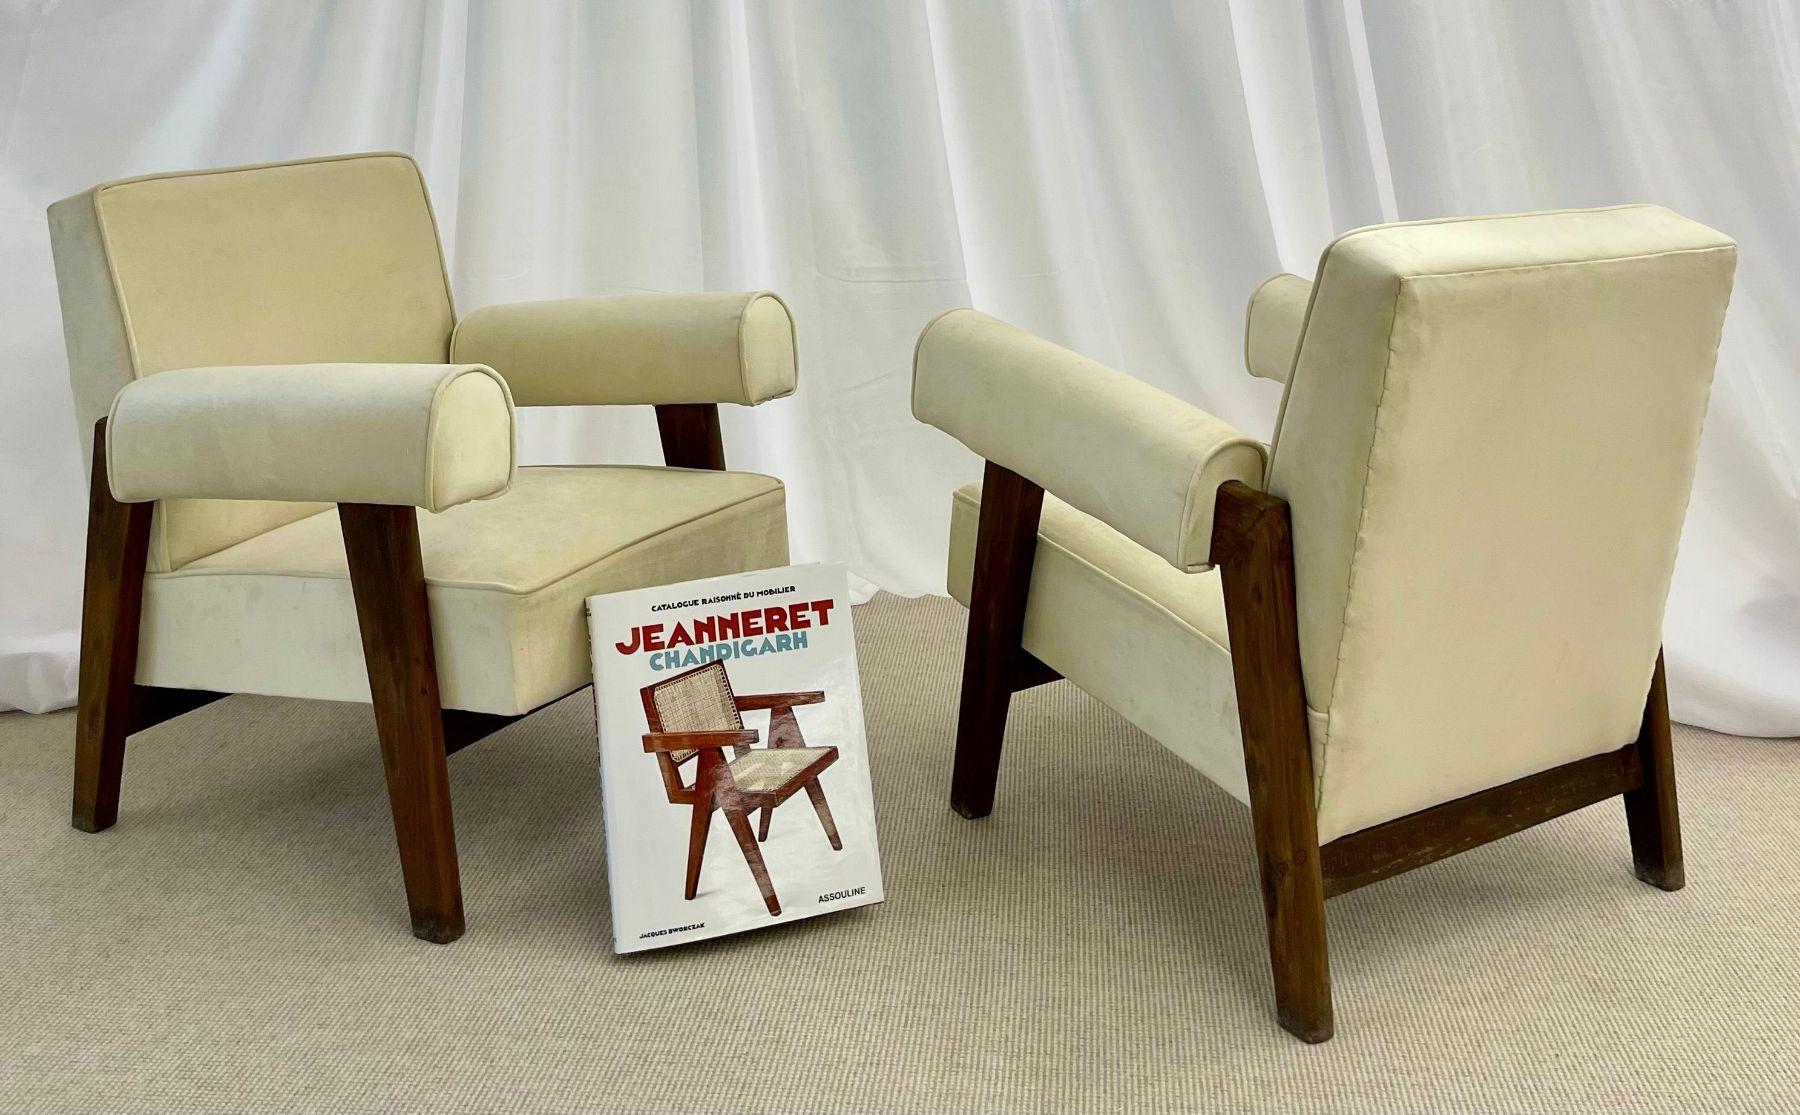 Pierre Jeanneret, French Mid-Century Modern, Bridge Chairs, Chandigarh c. 1960s

Pair of Pierre Jeanneret Upholstered Bridge chairs, Mid-Century Modern, Model PJ-SI-42-A. Chic pair of Jeanneret upholstered lounge chairs having a unique double